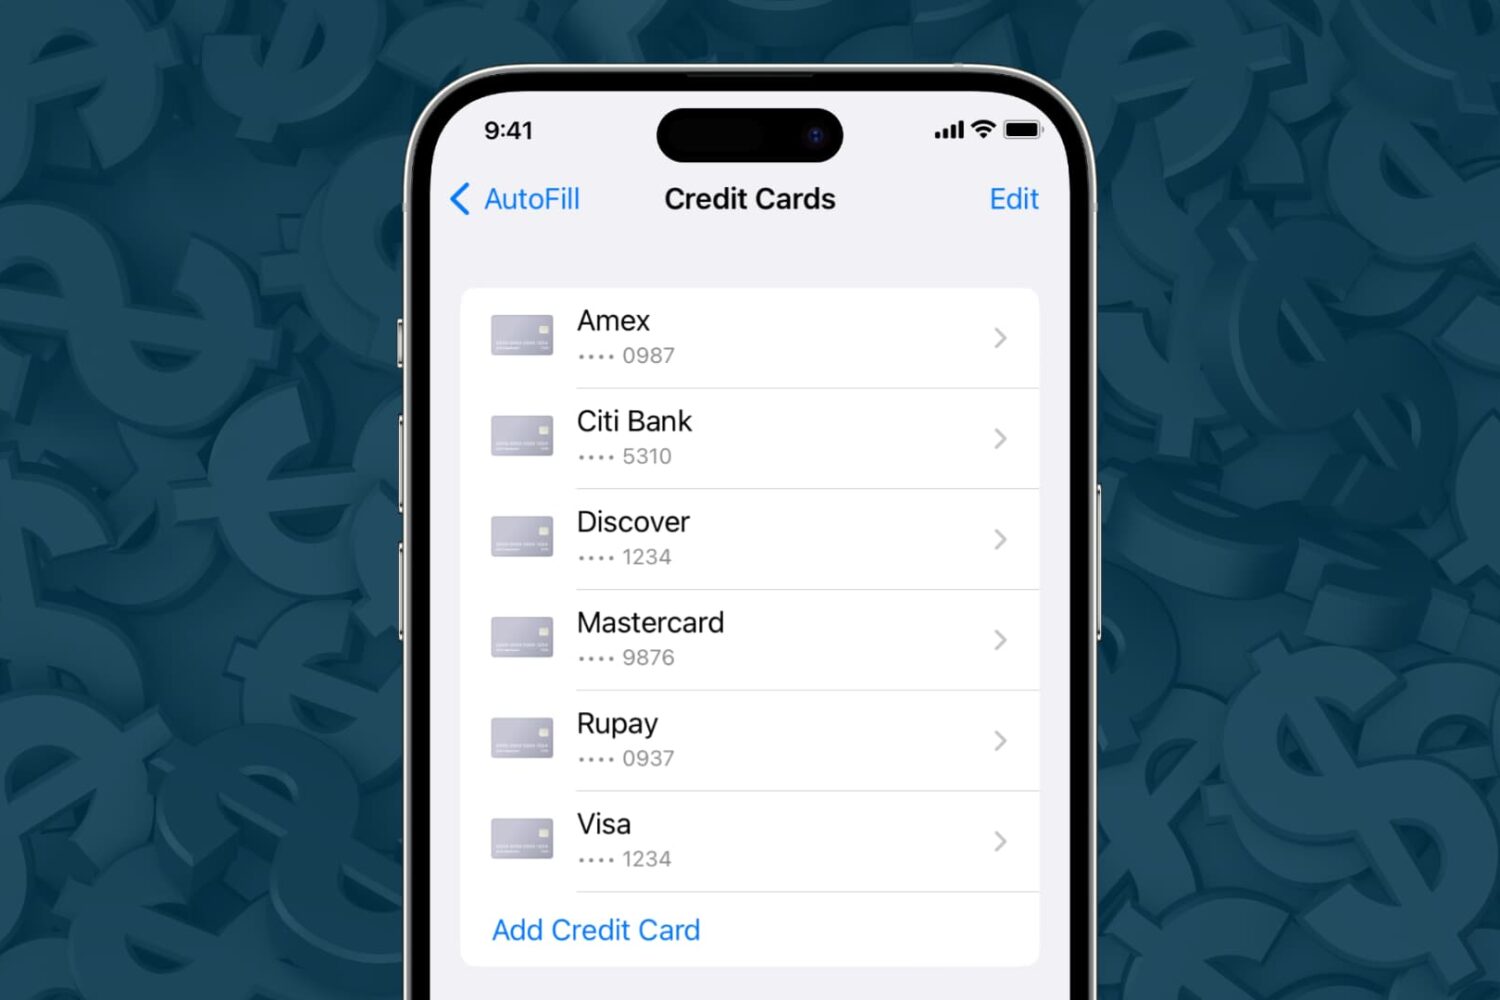 iPhone showing saved credit cards from Visa, Mastercard, Discover, Rupay, and Citi bank